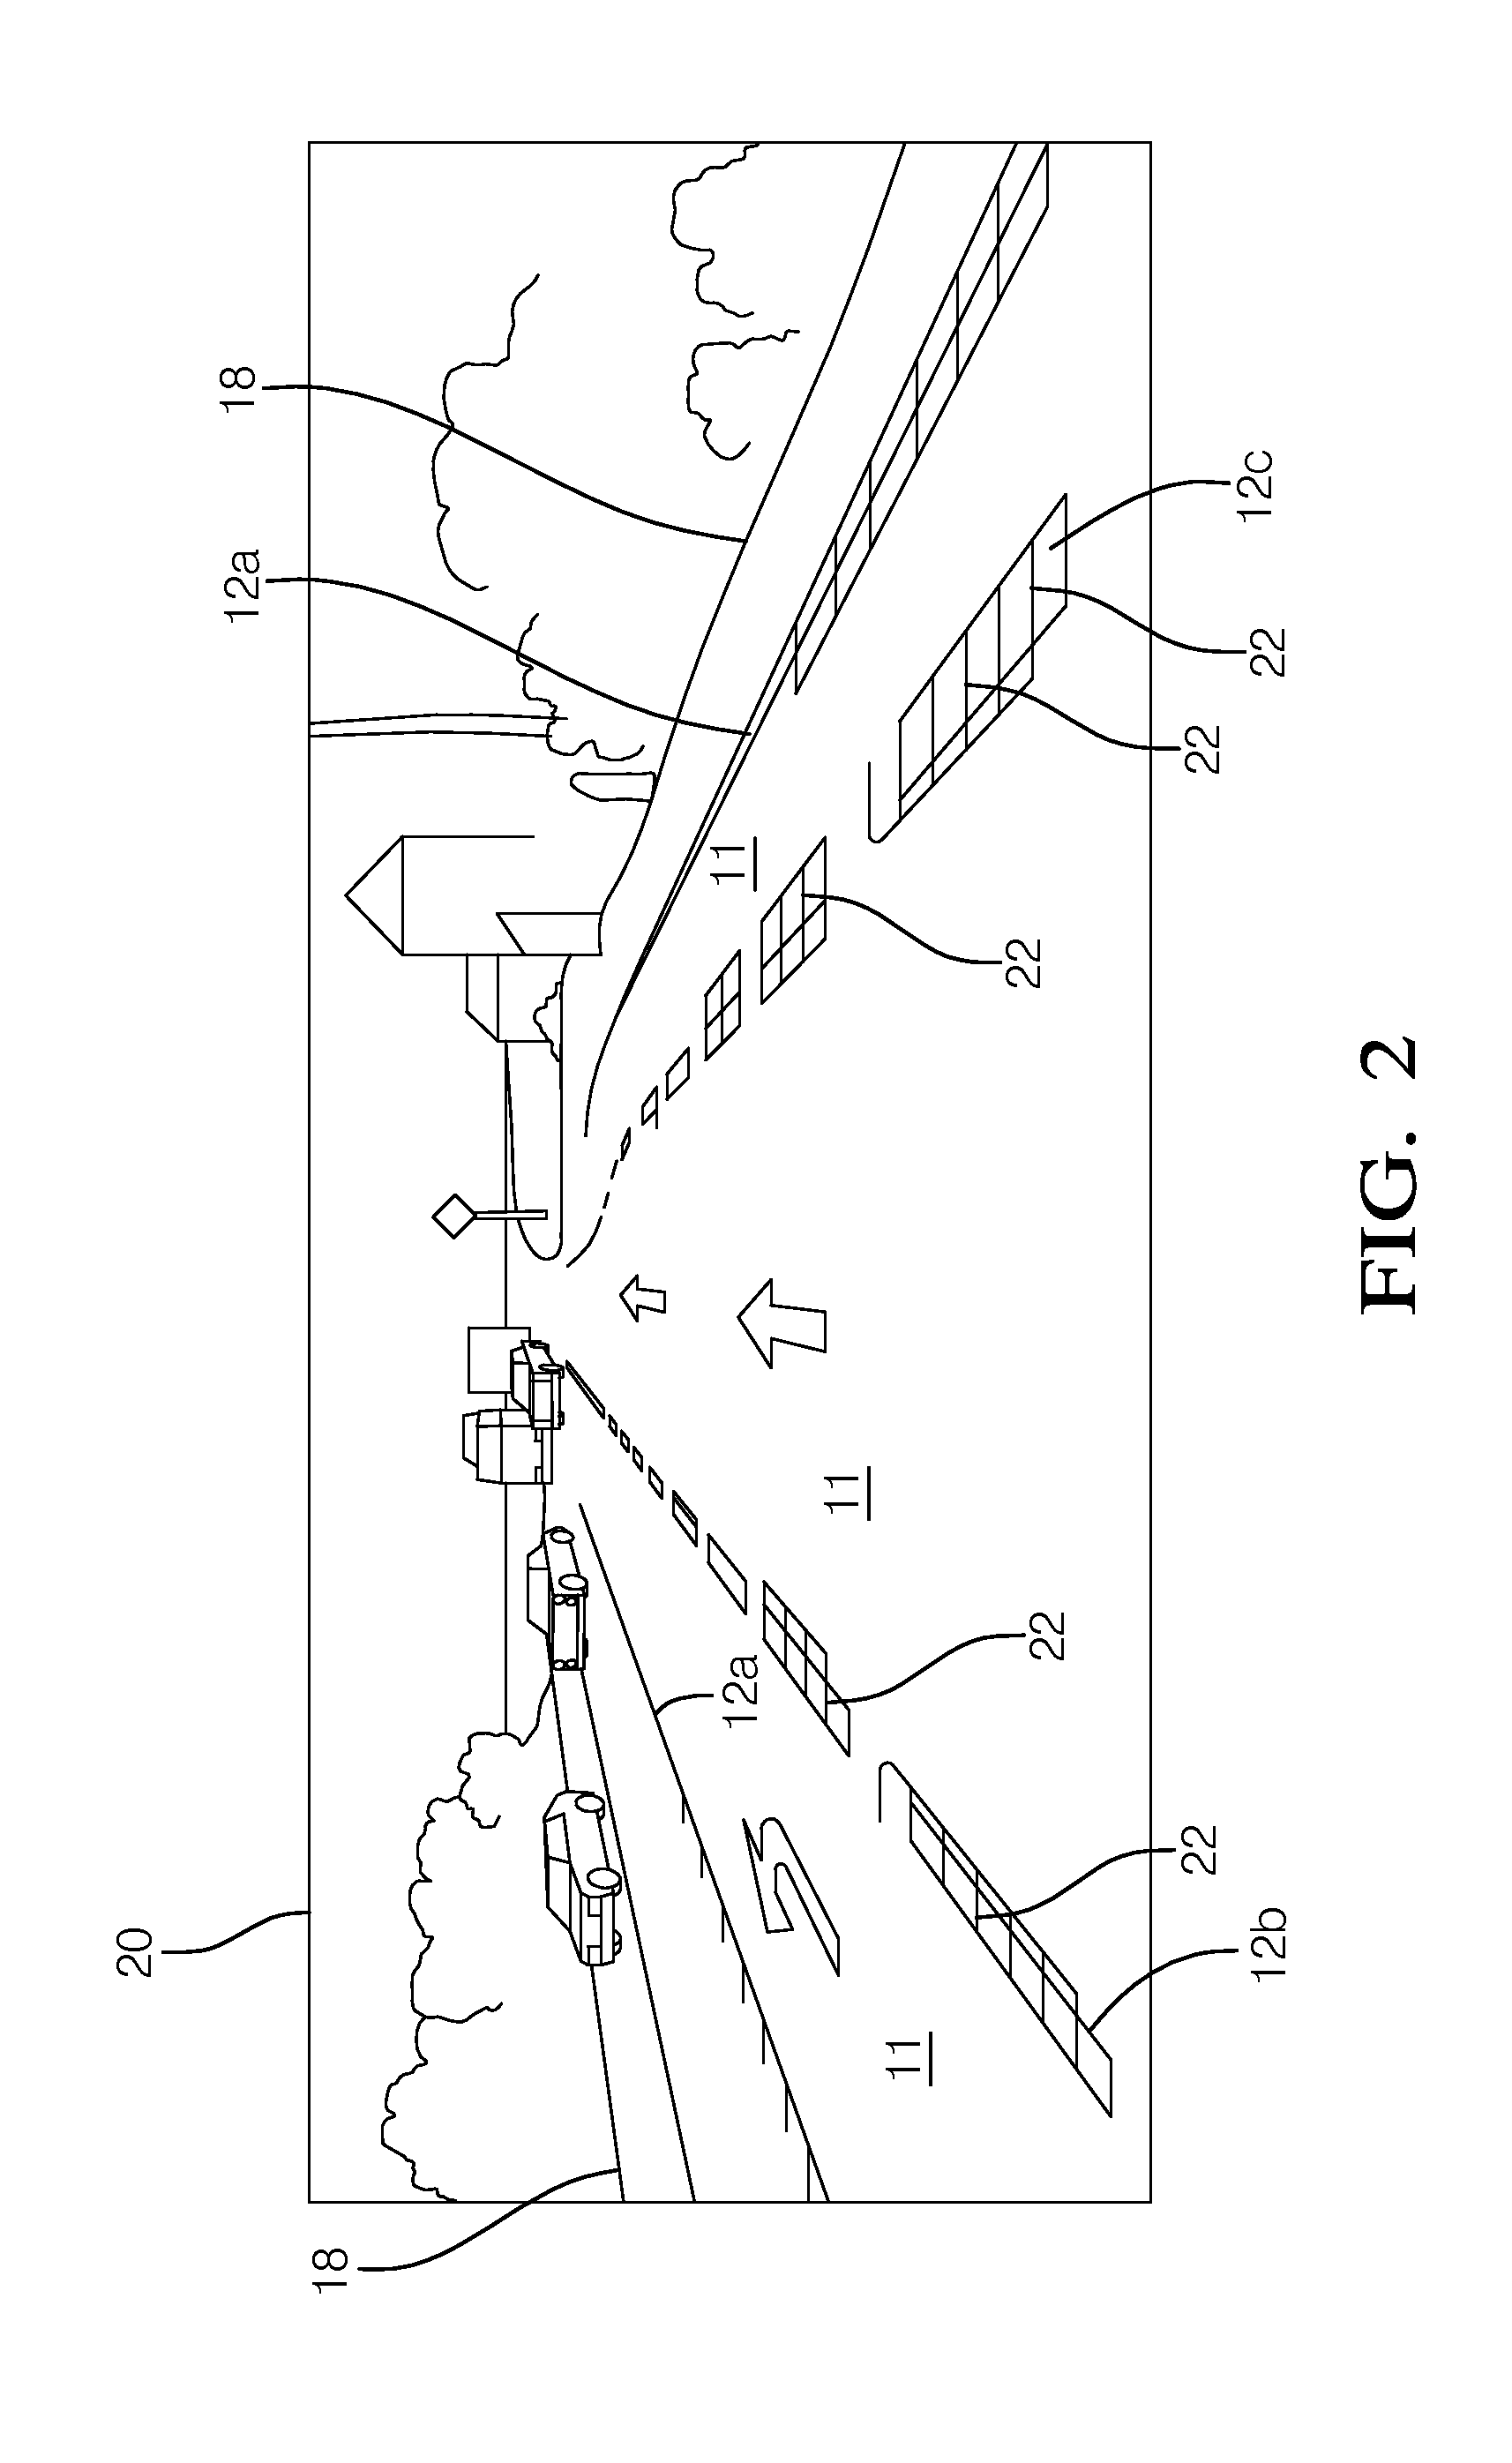 Method for the detection and tracking of lane markings